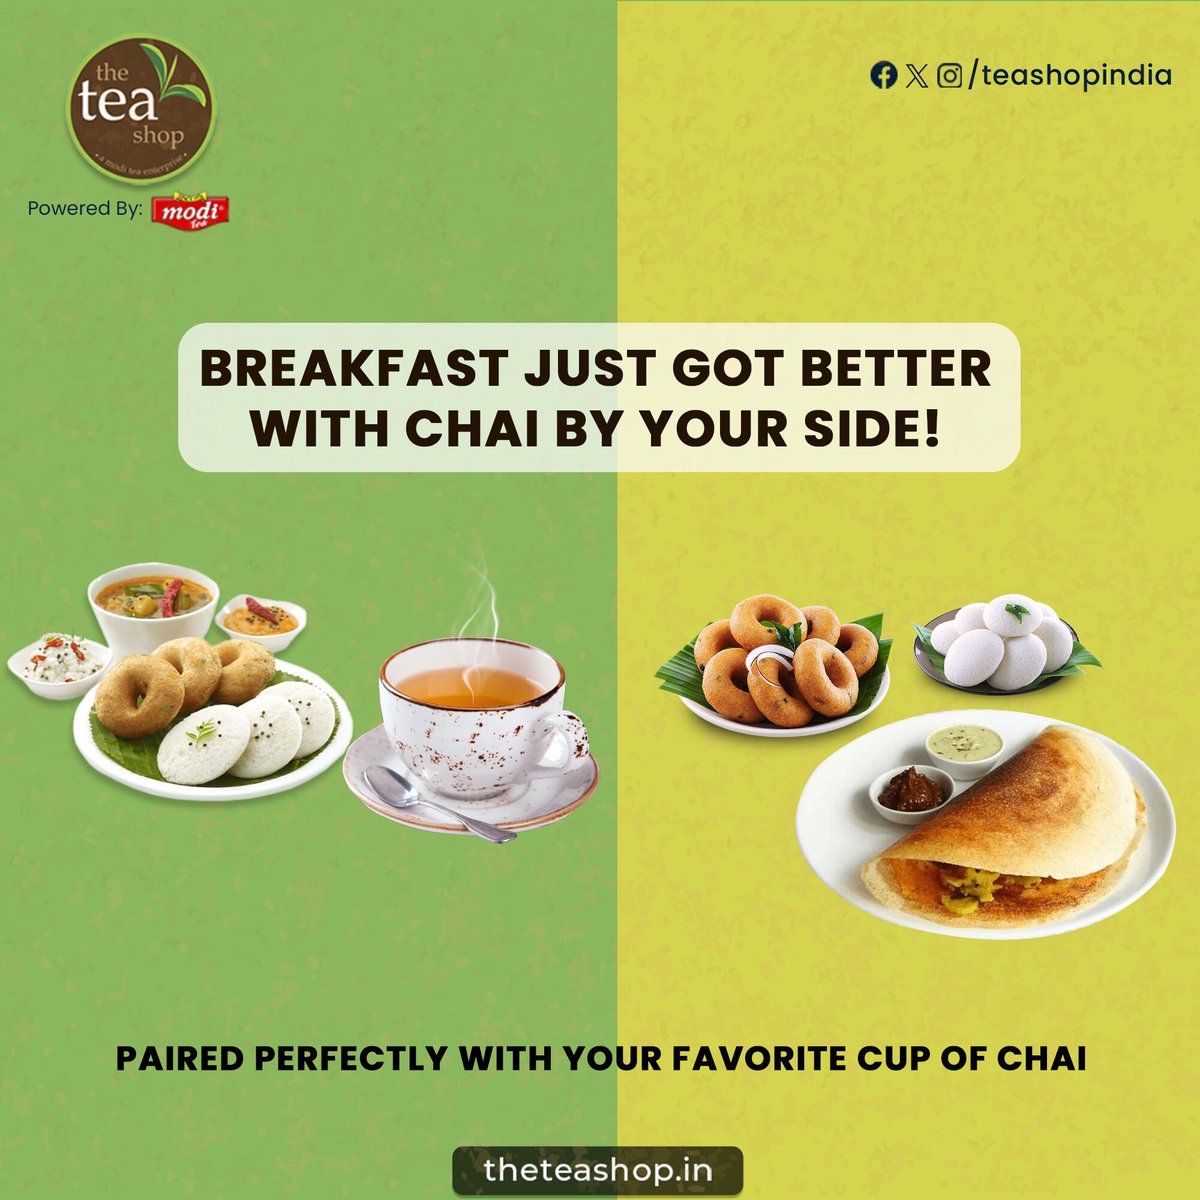 Breakfast preferences for

South Indian | Chai Lover

A true Chai Lover never says no to Chai
.
.
.
#theteashop #teashop #tea #teatime #southindianbreakfast #breakfast #breakfasttime #indianbreakfast #teabrand #chai #tealovers #chailovers #teaislove #healthytea #teaislife